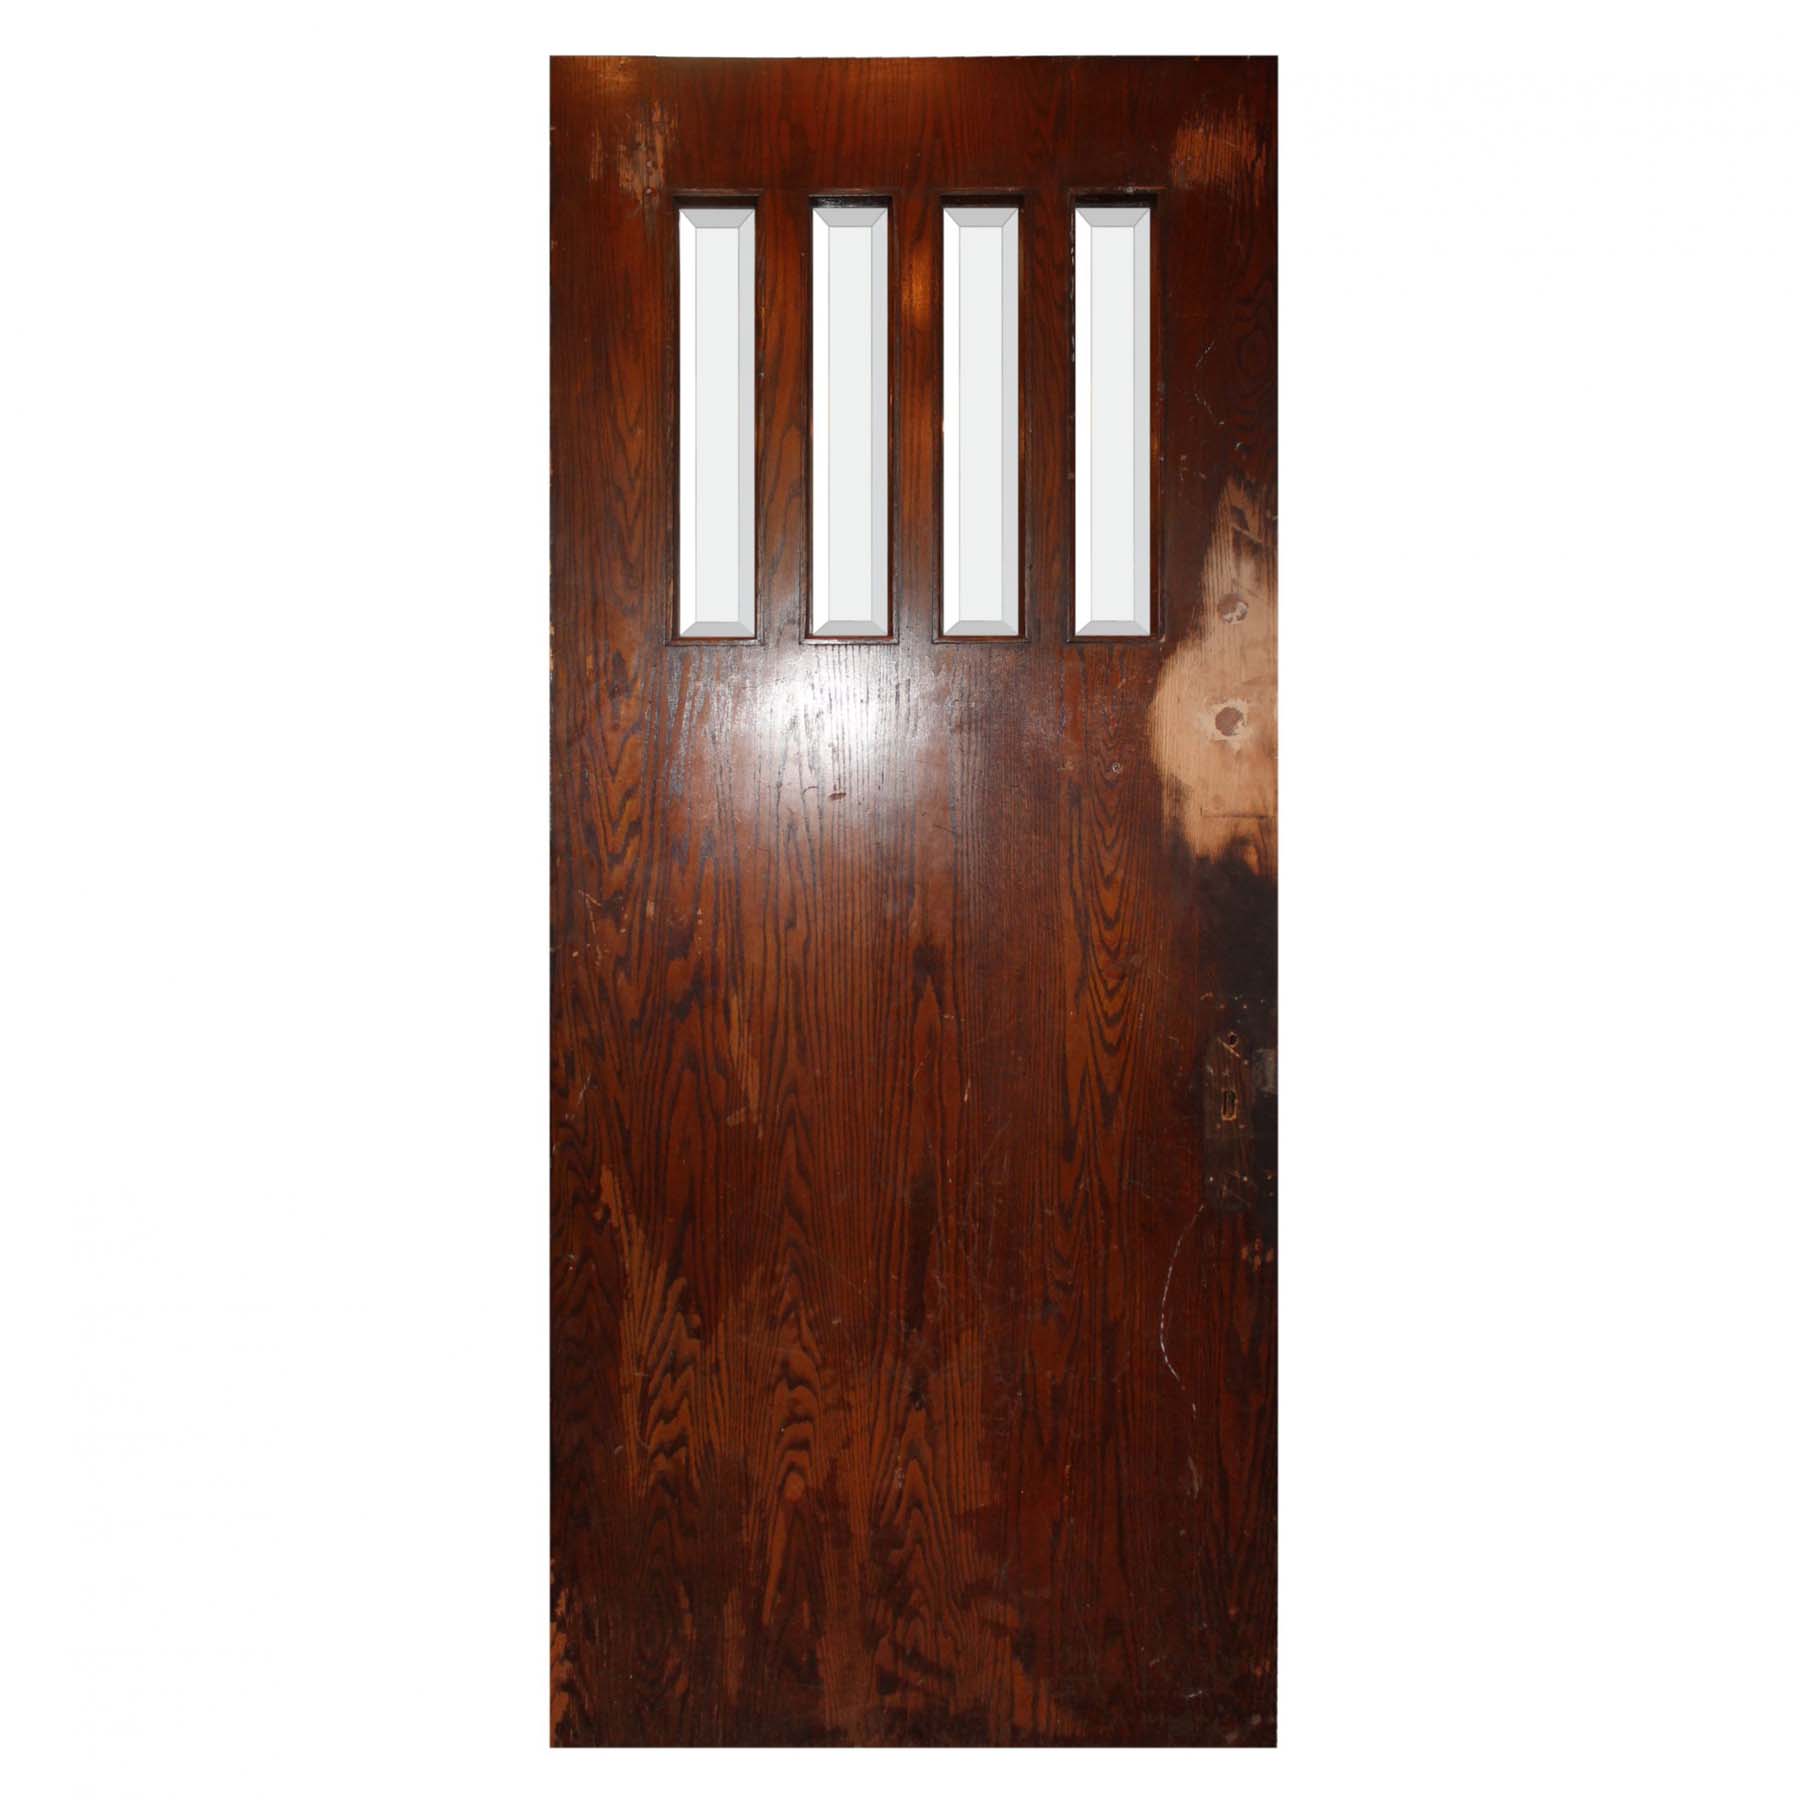 Salvaged 36” Craftsman Entry Door with Beveled Glass-71335